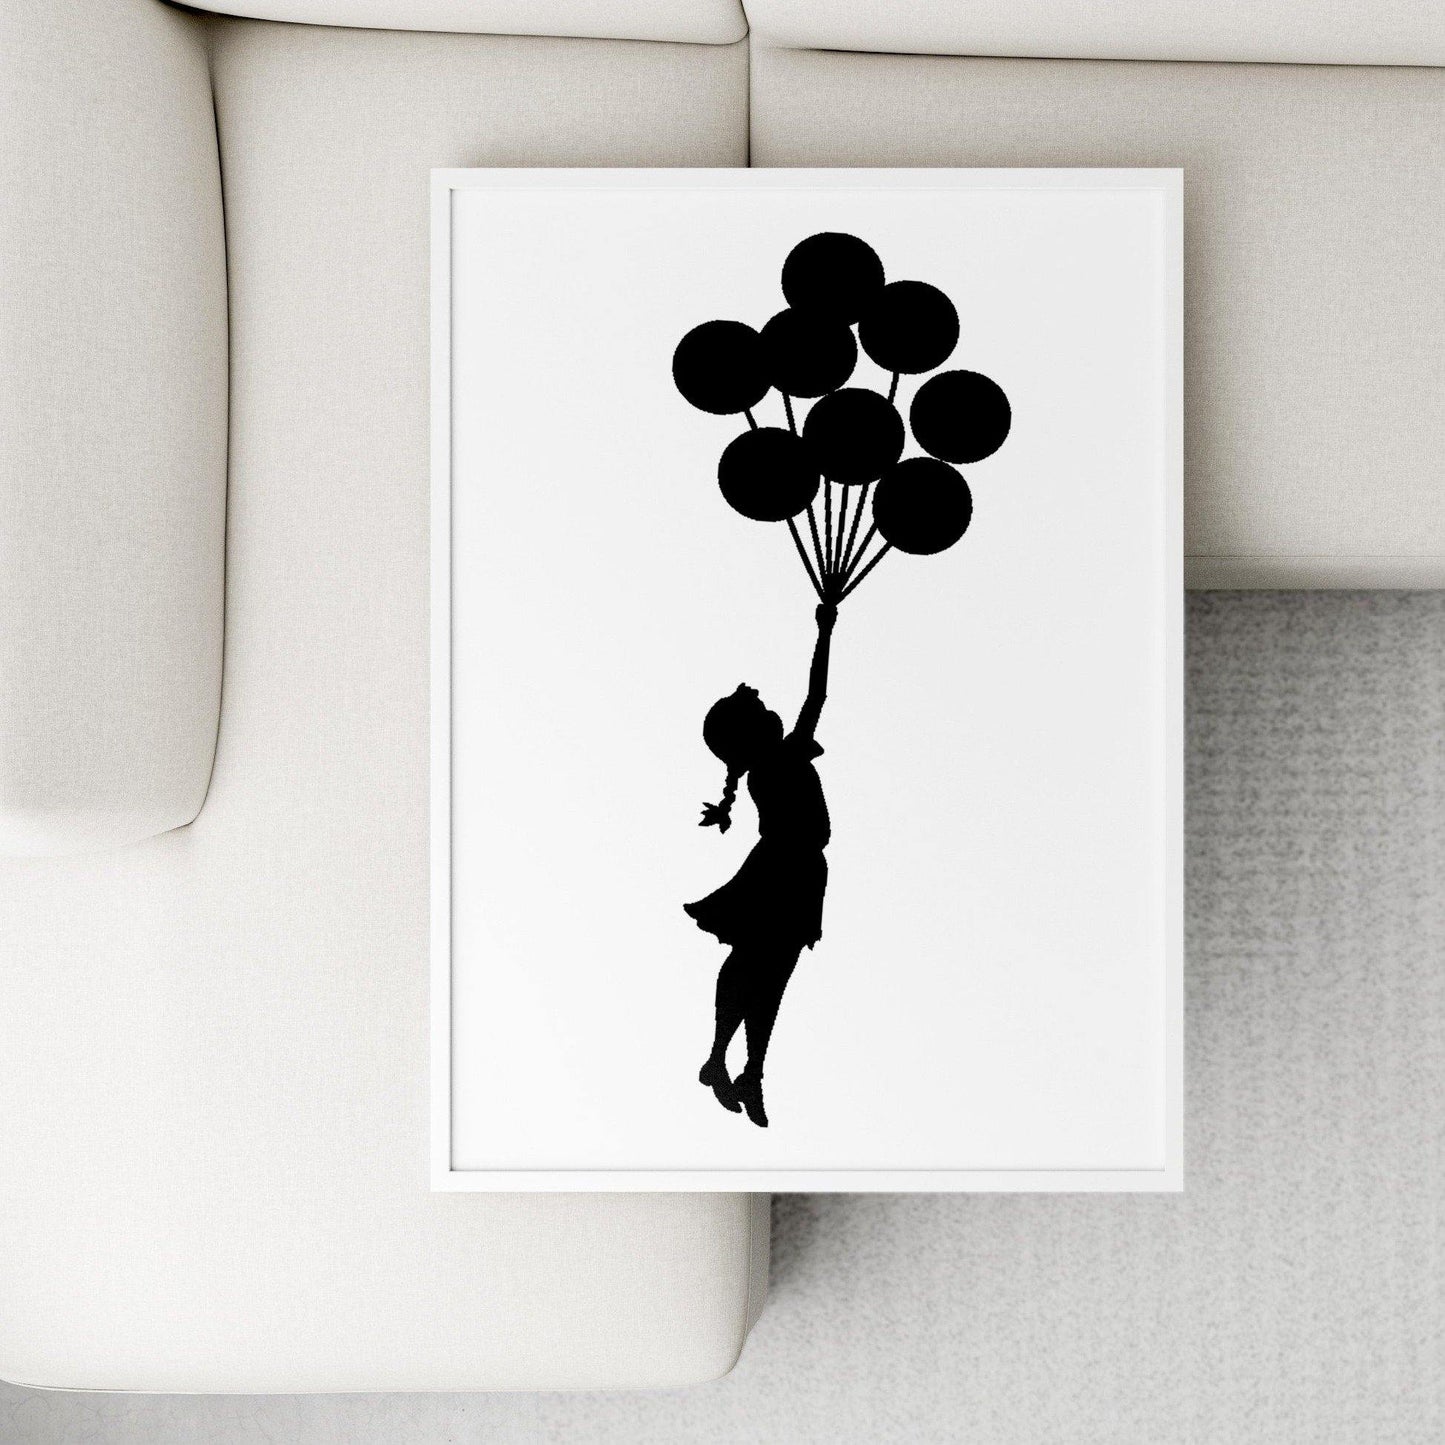 A beloved street artist comes to life in this limited edition Banksy print. Banksy is one of the most famous street artists in the world, and this piece is a perfect embodiment of his work. A young girl triumphantly holds onto a bunch of balloons, as if escaping from the everyday. Perfect for the art lover in your life, this print is a must-have for any Banksy fan. Hang it up in your home and enjoy looking at it every day.